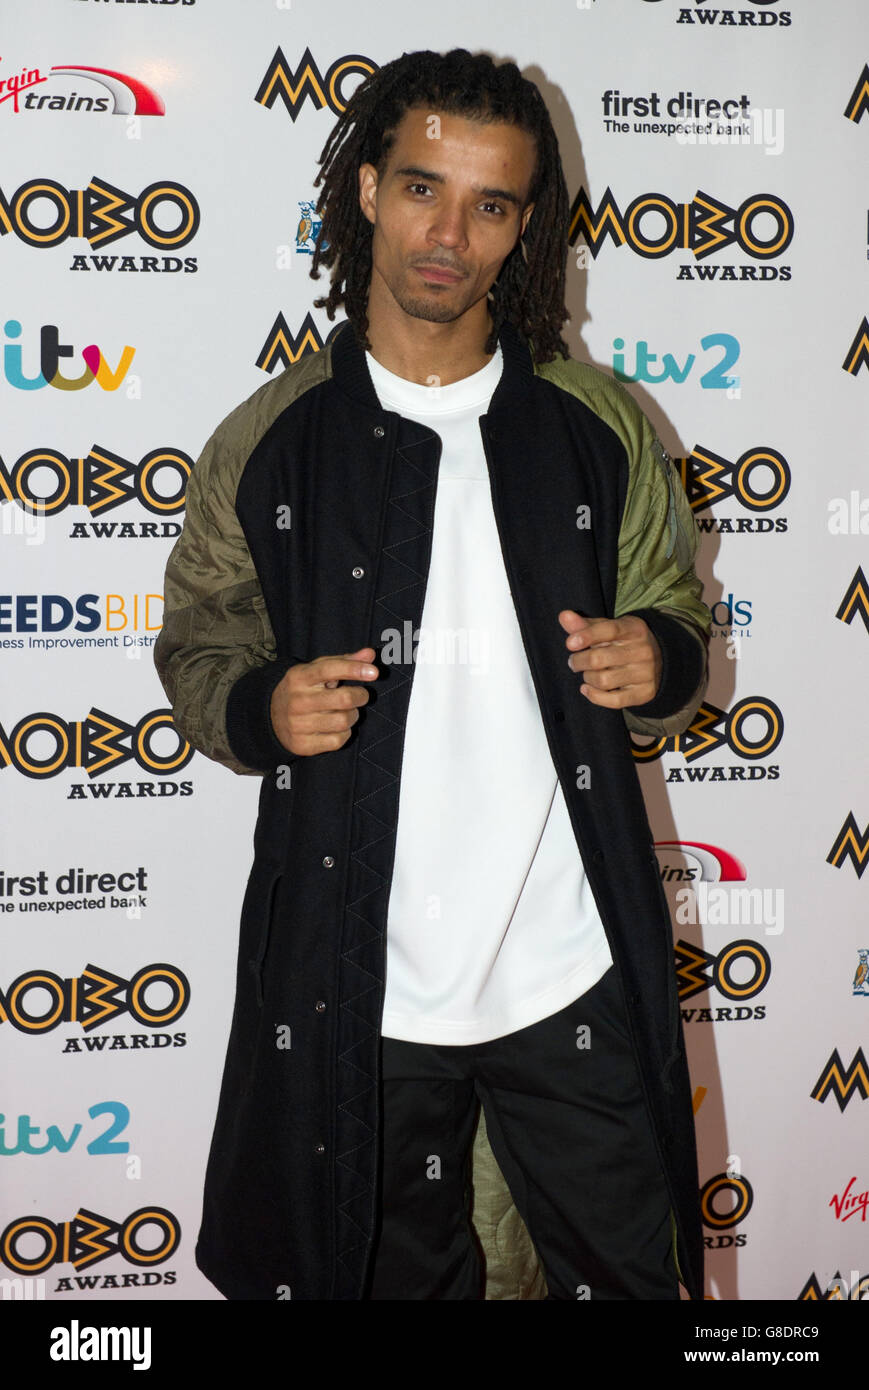 Akala arriving at the Mobo Awards 2015, held at the First Direct Arena, Leeds. PRESS ASSOCIATION Photo. See PA story SHOWBIZ Mobos. Picture date: Wednesday November 4, 2015. Photo credit should read: Katja Ogrin/PA Wire Stock Photo